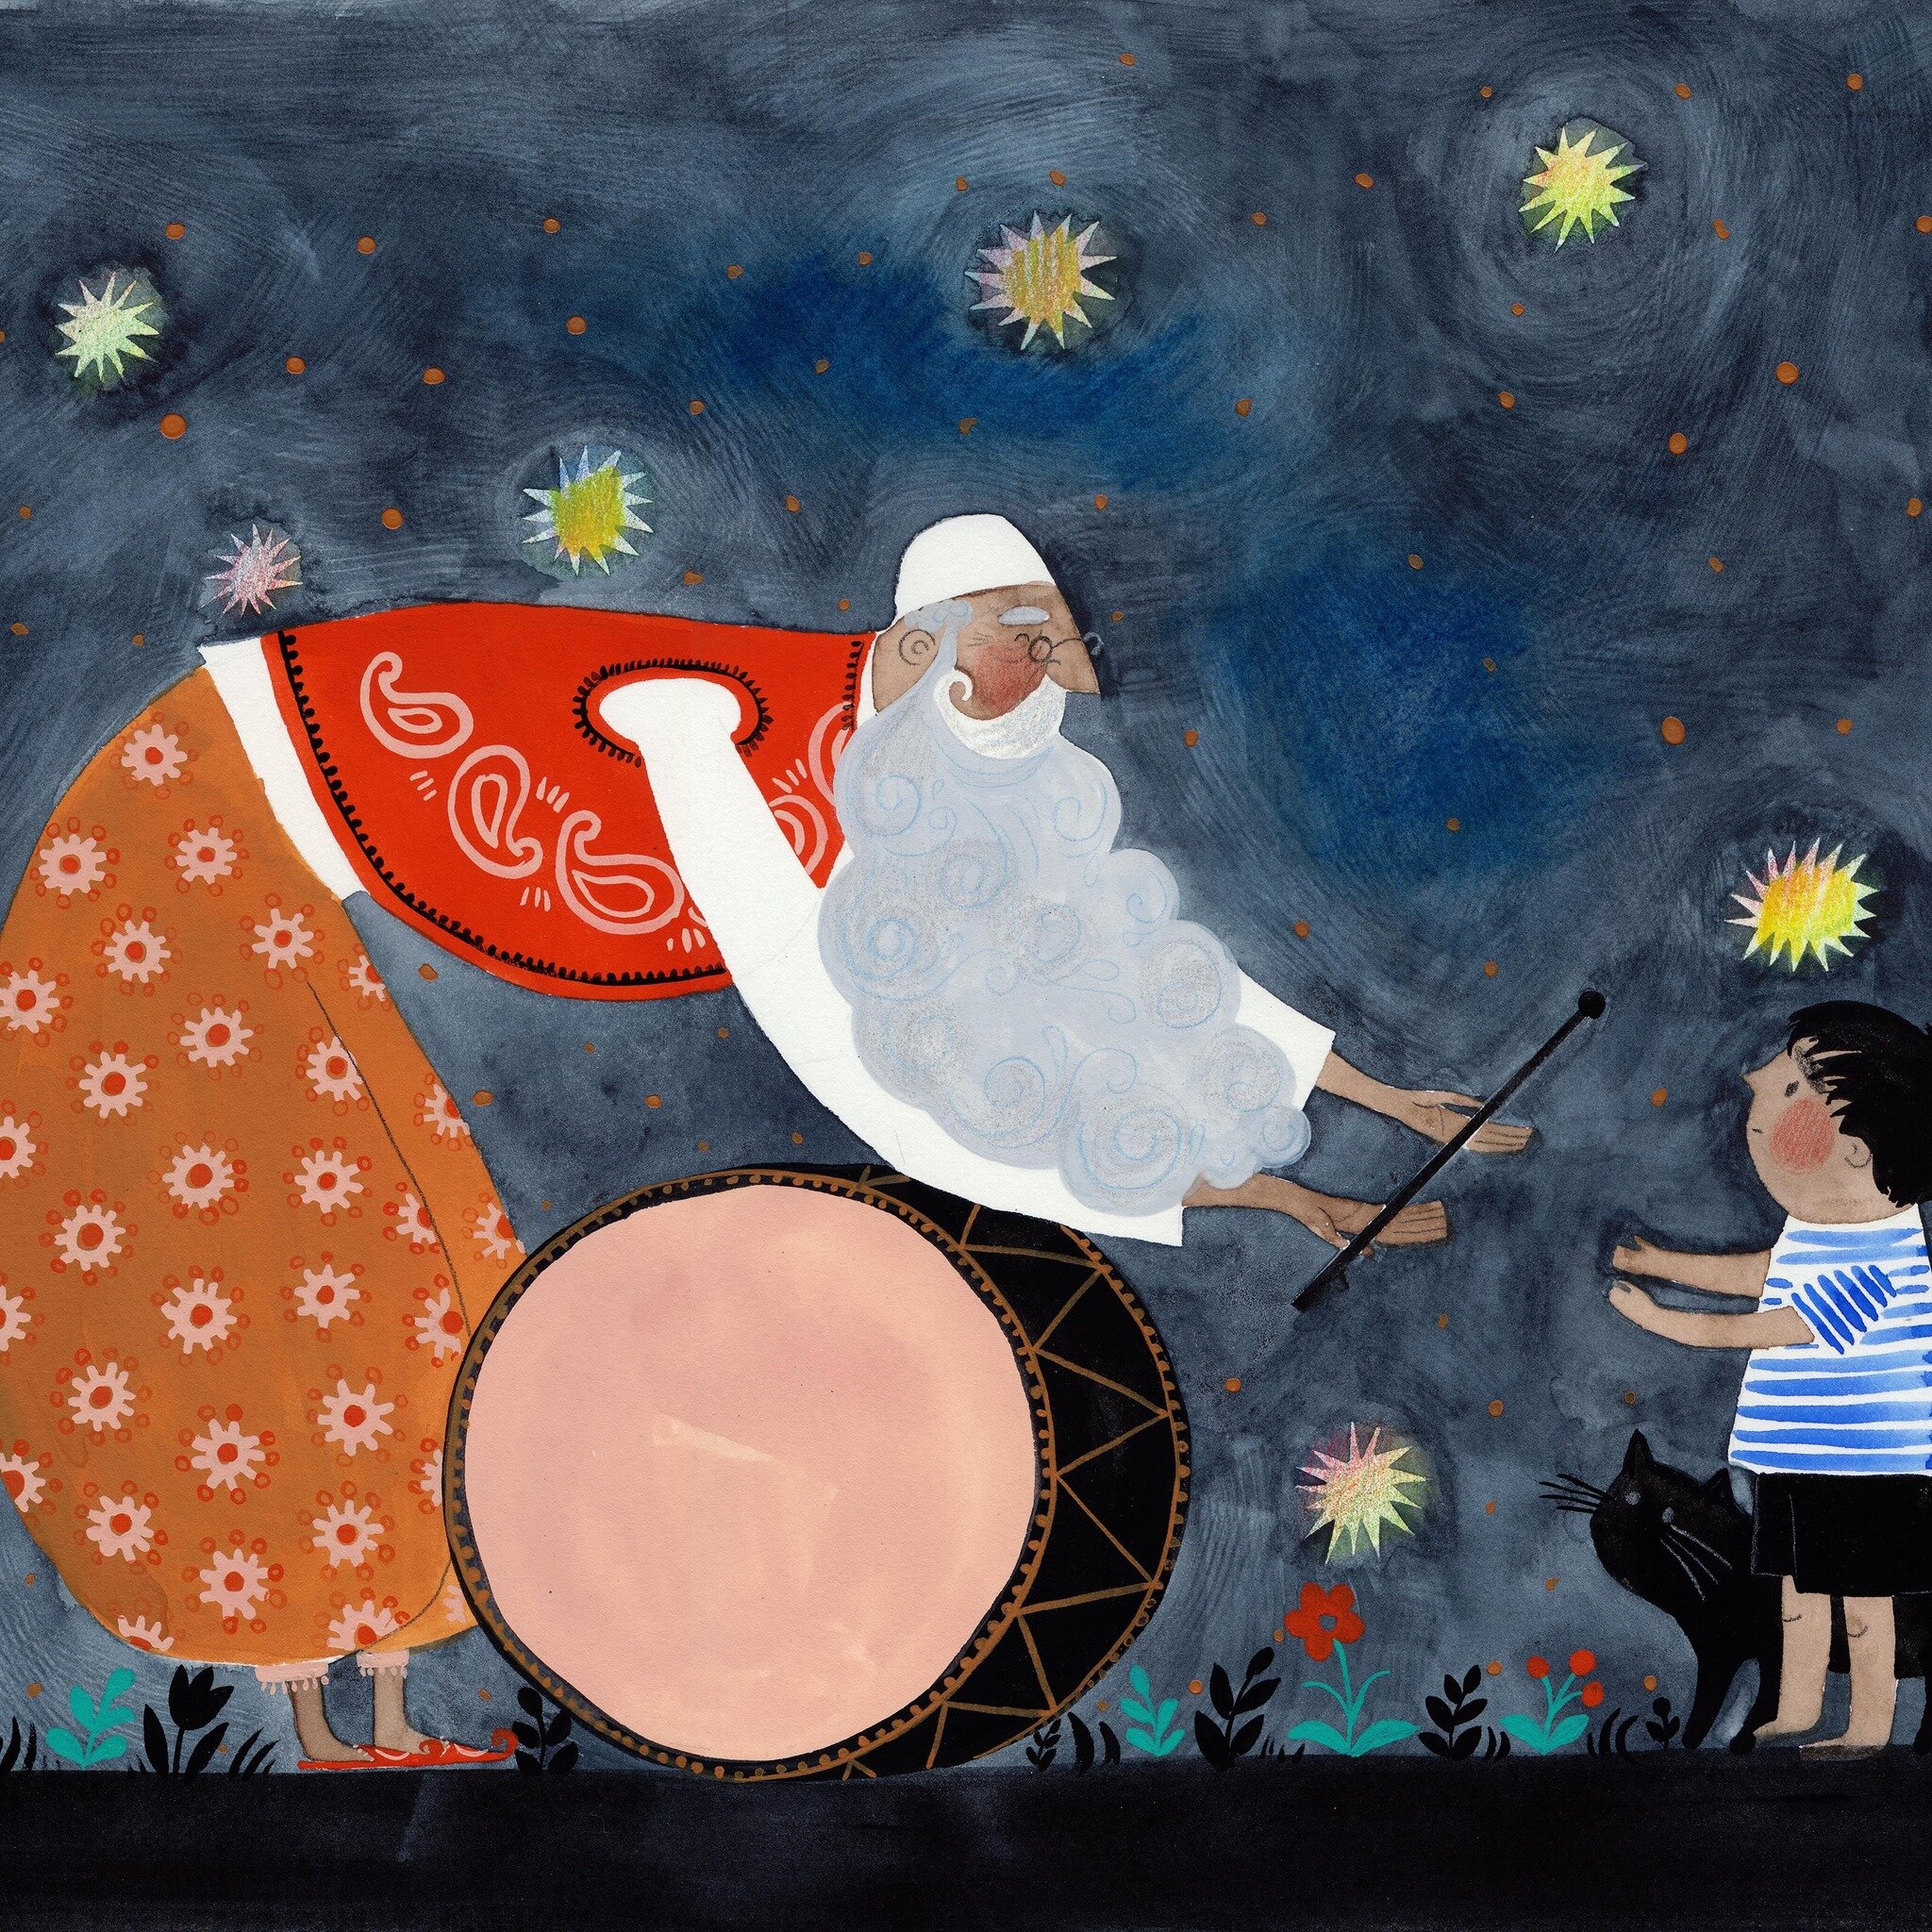 The Ramadan Drummer is a beloved figure from centuries old tradition. He appears during the month of Ramadan and wakes up families for their pre-dawn meal. The Ramadan Drummer walks around neighborhoods, beating his drum, and waking those observing t